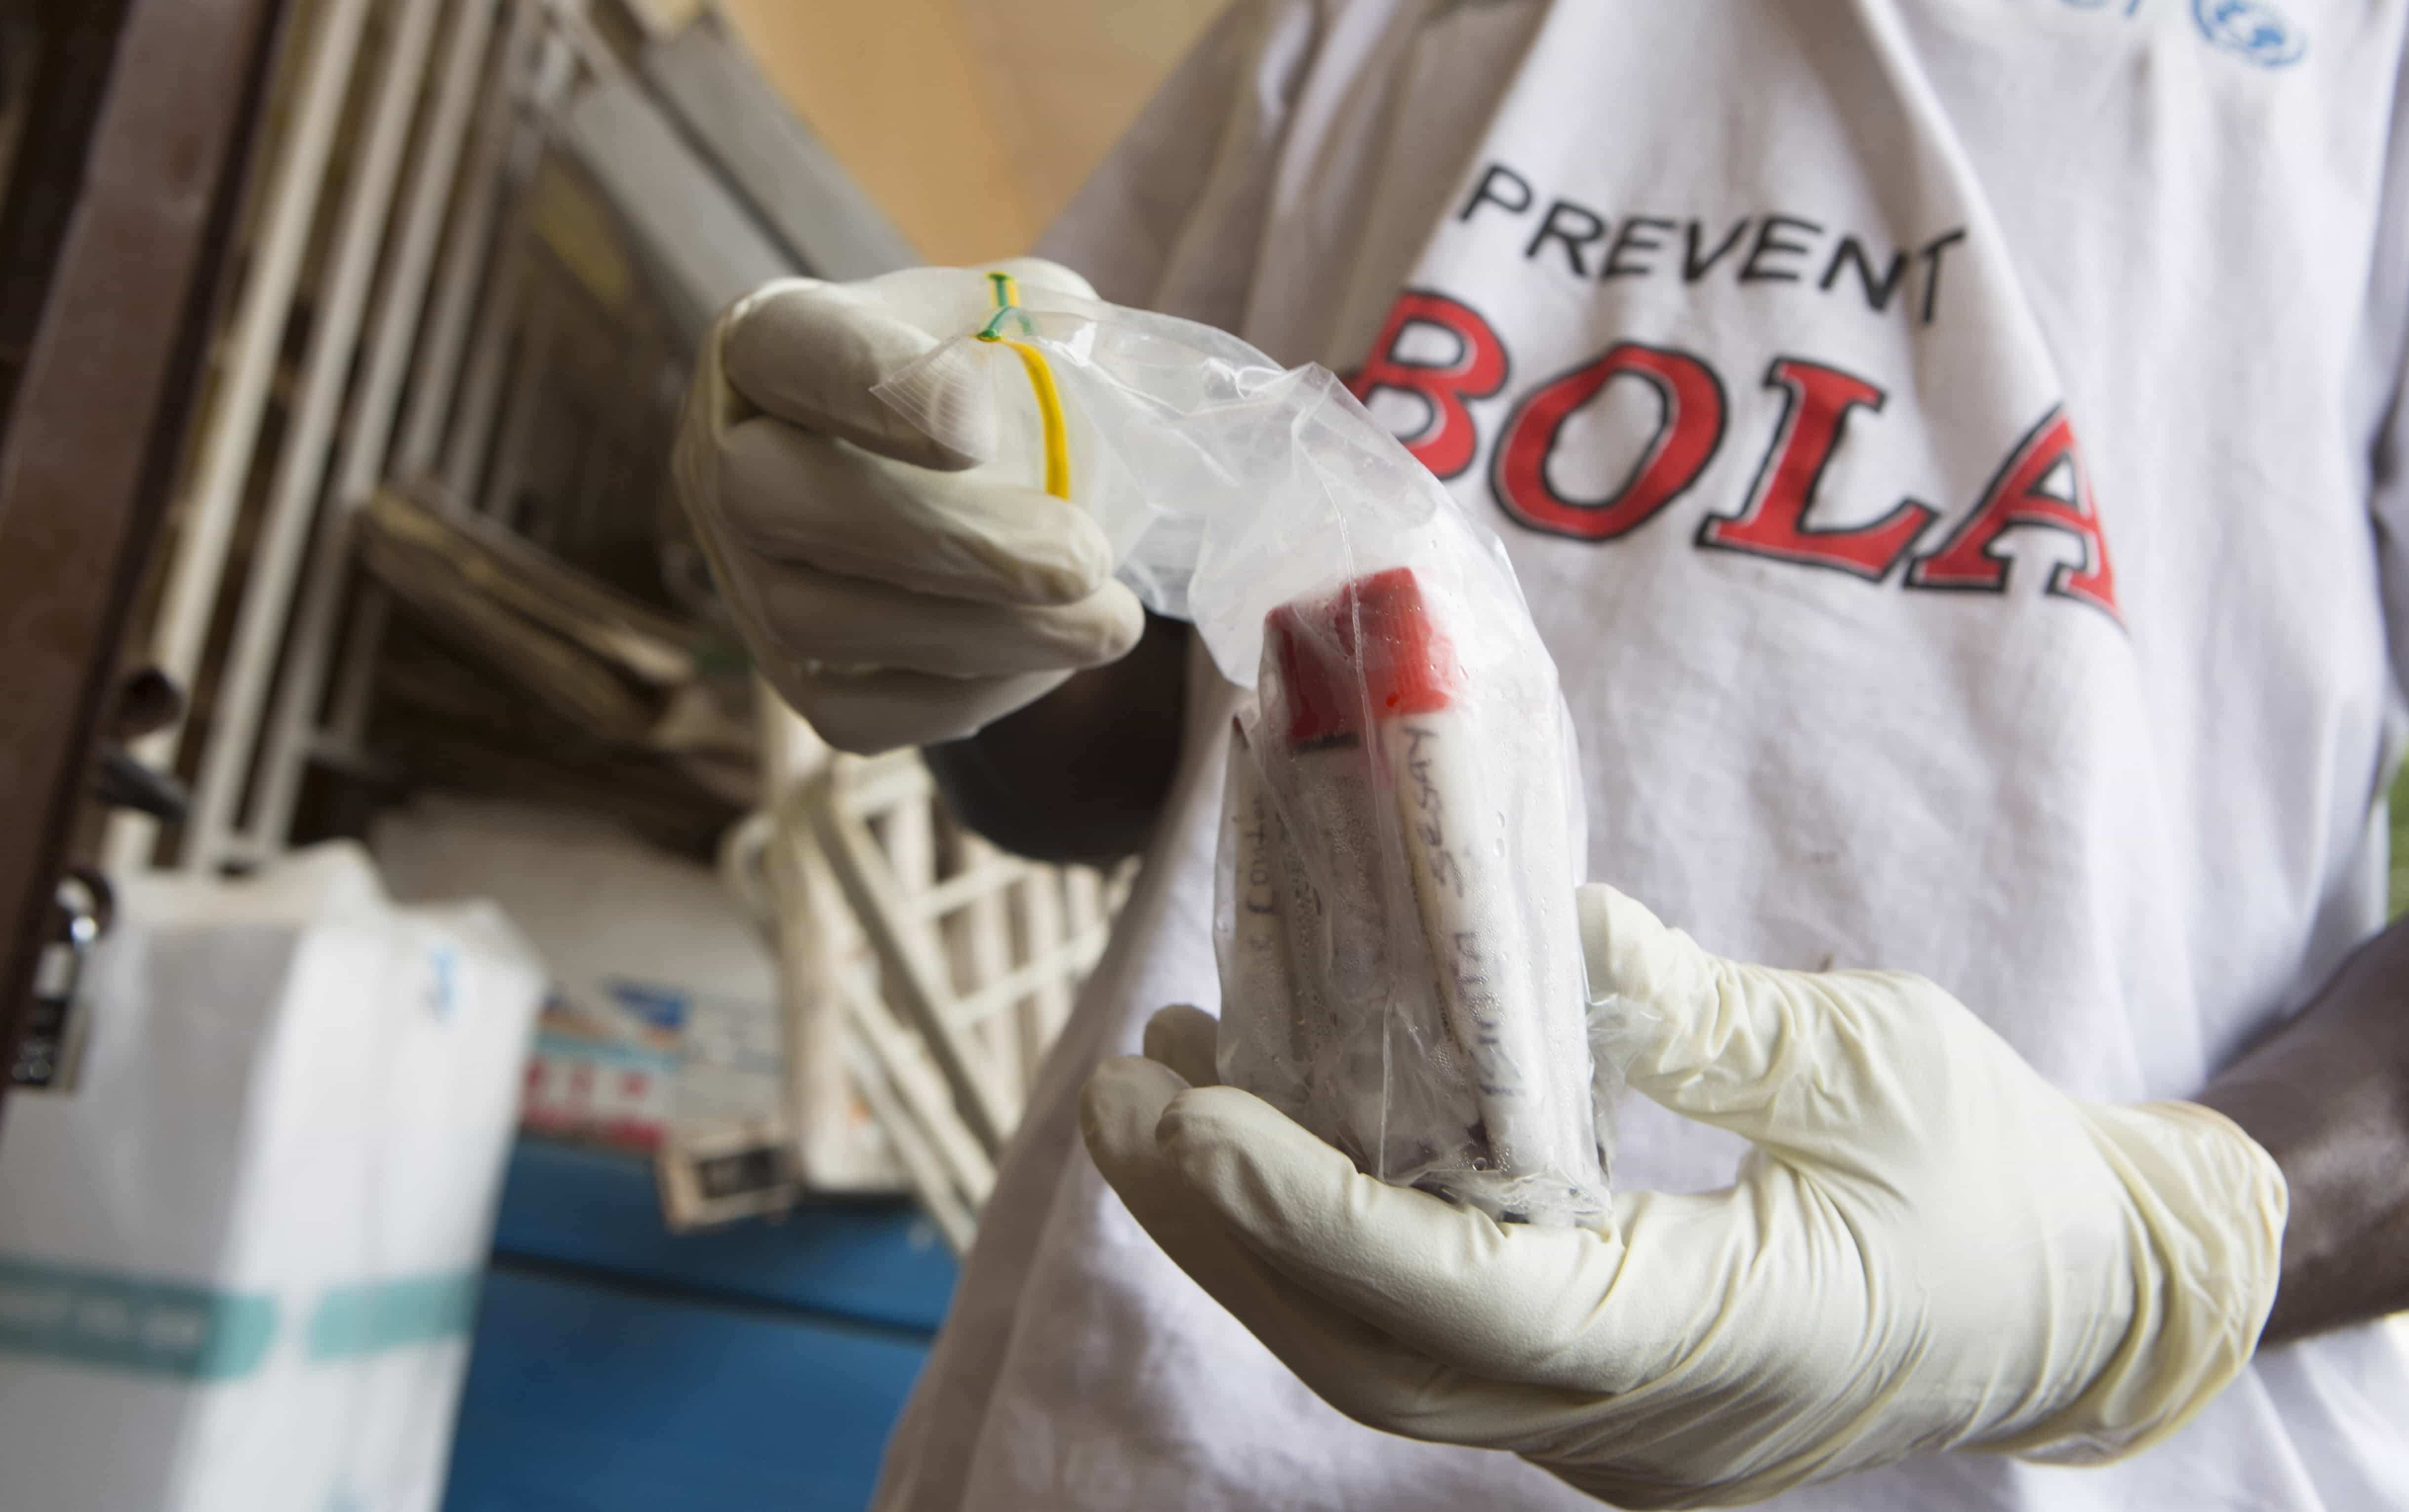 Blood samples from patients suspected of having the Ebola virus disease are prepared for transportation to Freetown for testing, at Port Loko, Sierra Leone, 27 September 2014, REUTERS/Christopher Black/WHO/Handout via Reuters